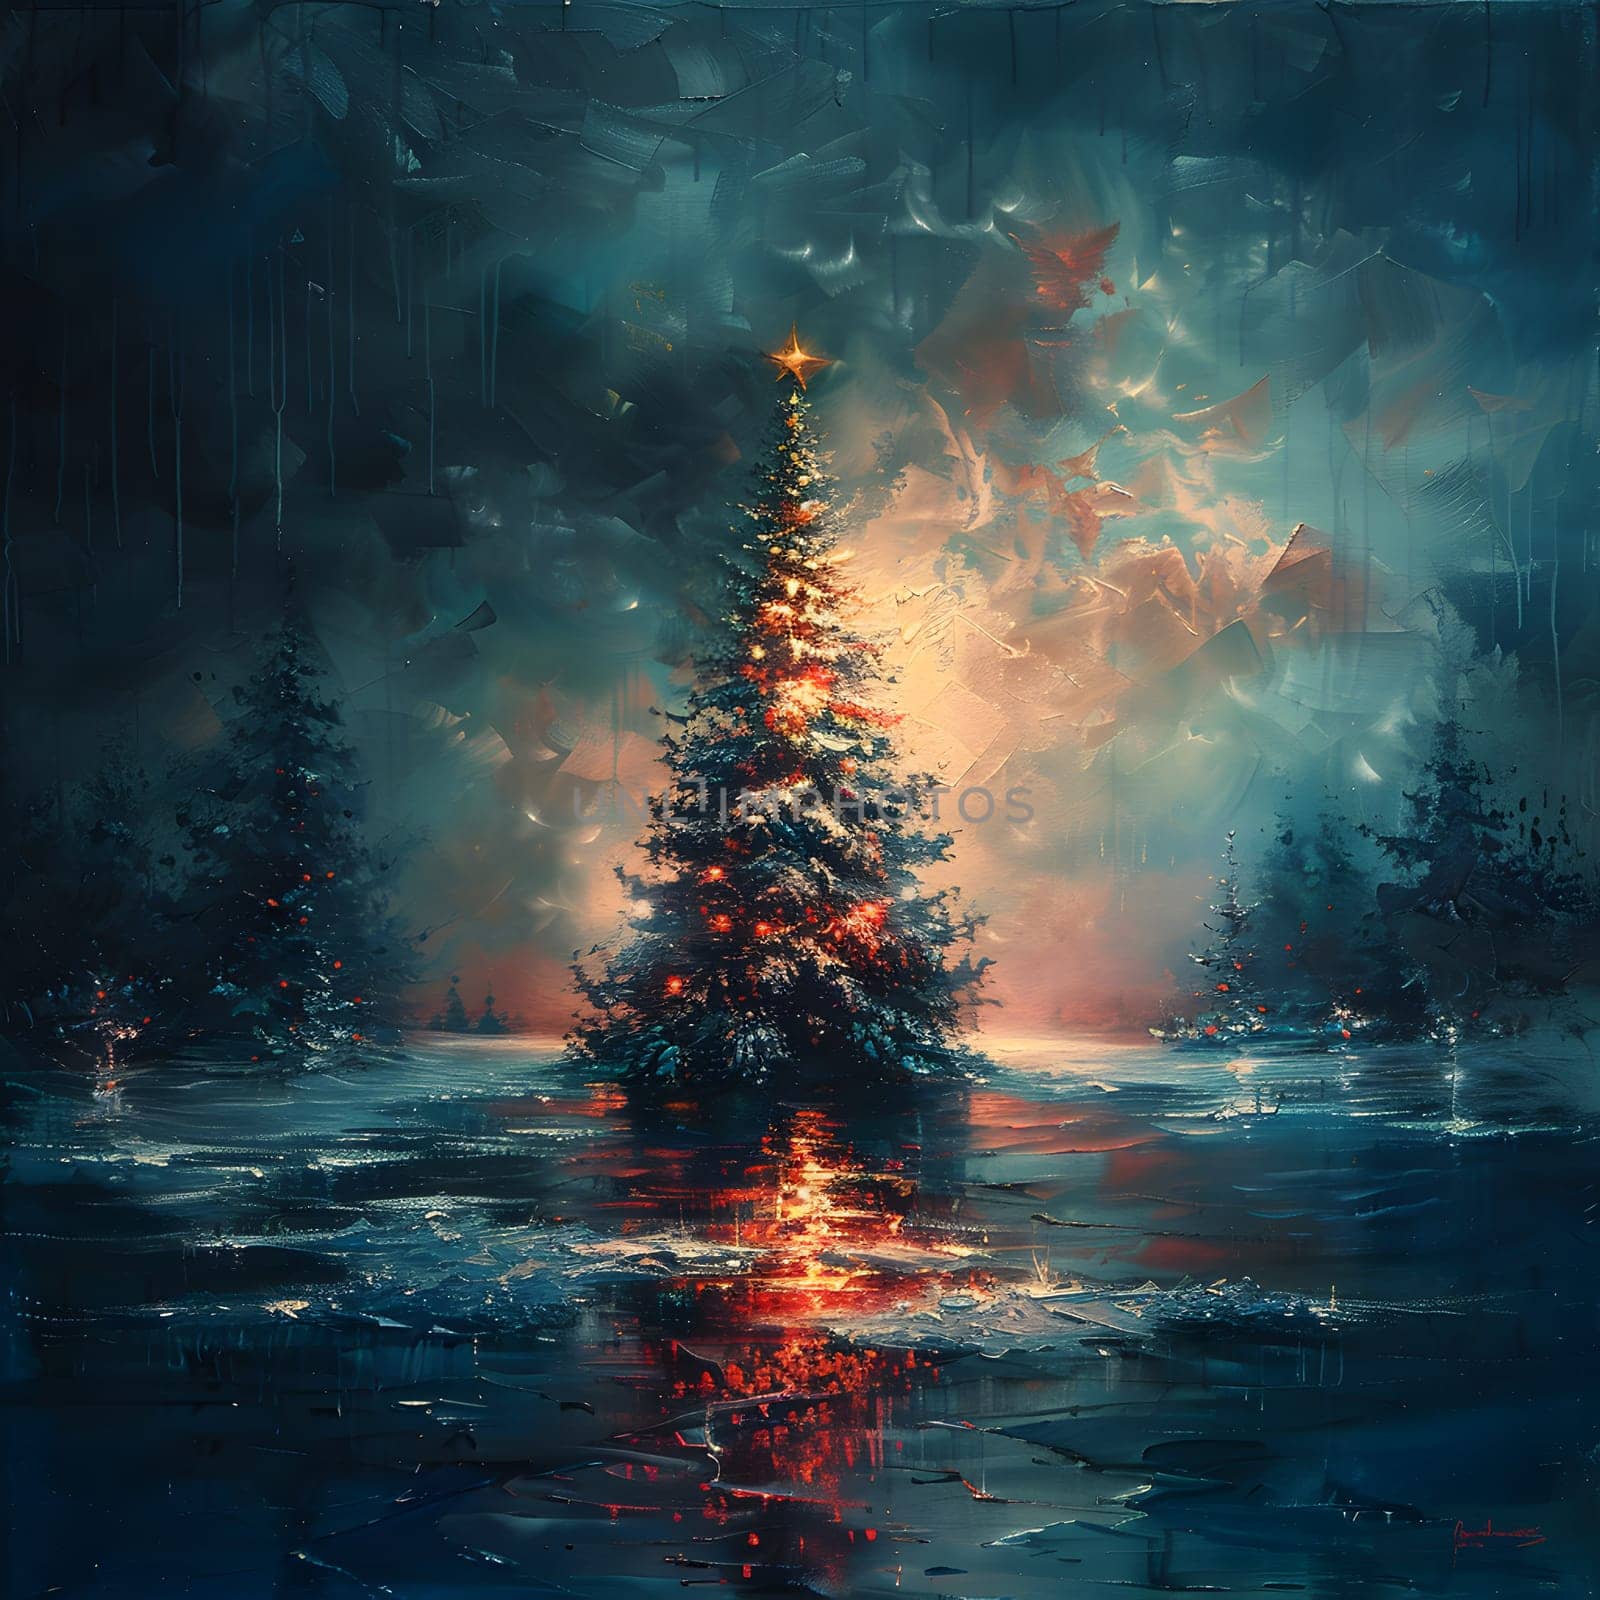 An art piece depicting a Christmas tree standing in the middle of a lake surrounded by a natural landscape. The evergreen tree reflects on the water, under a colorful sky